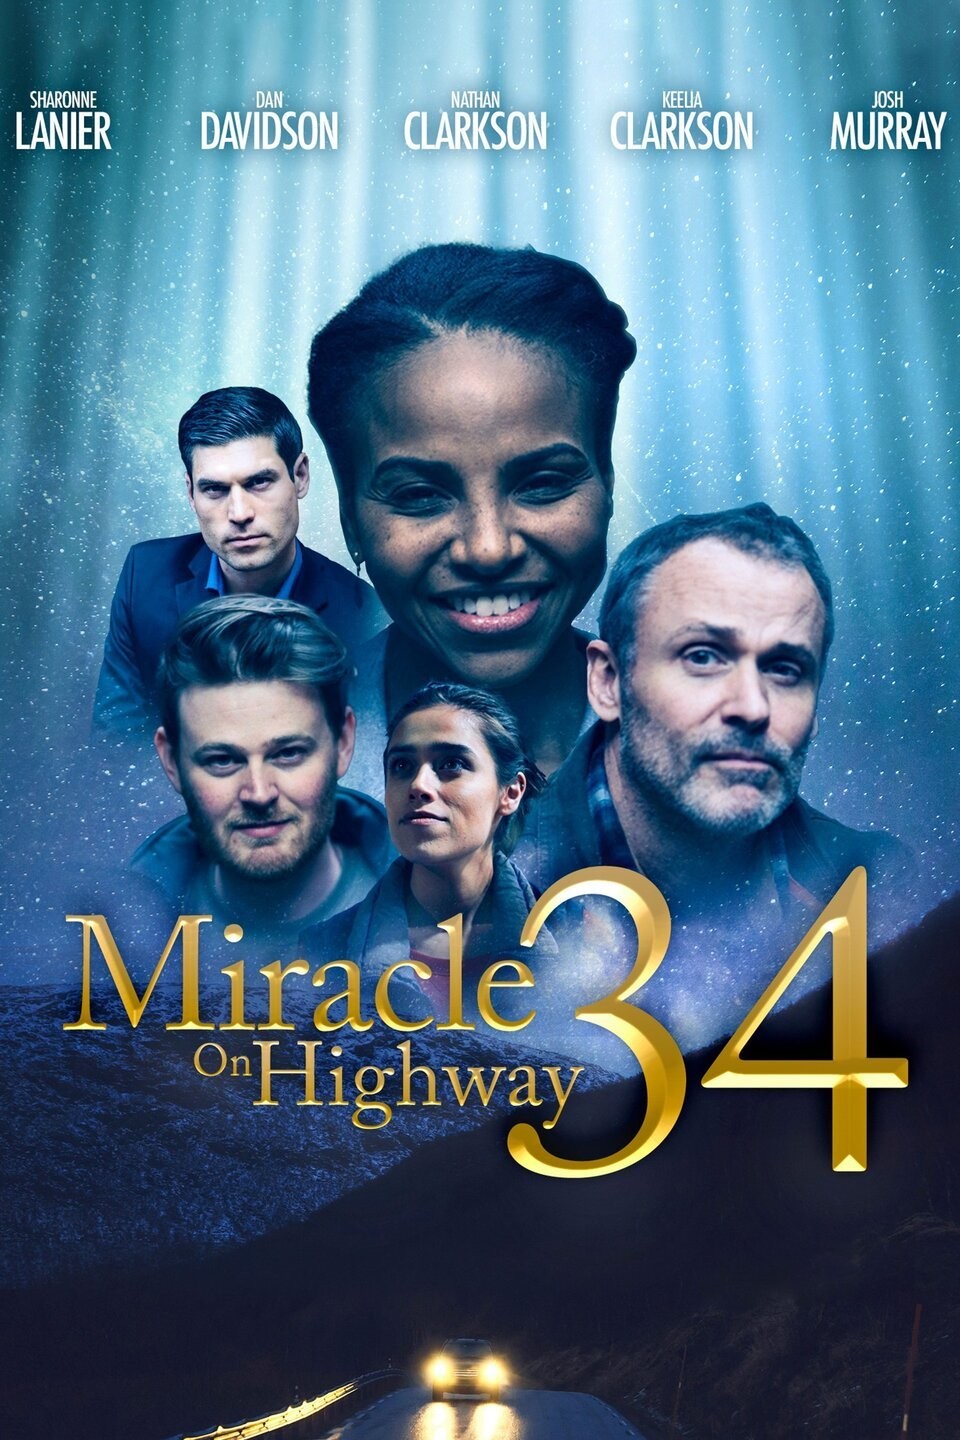 highway 34 movie review